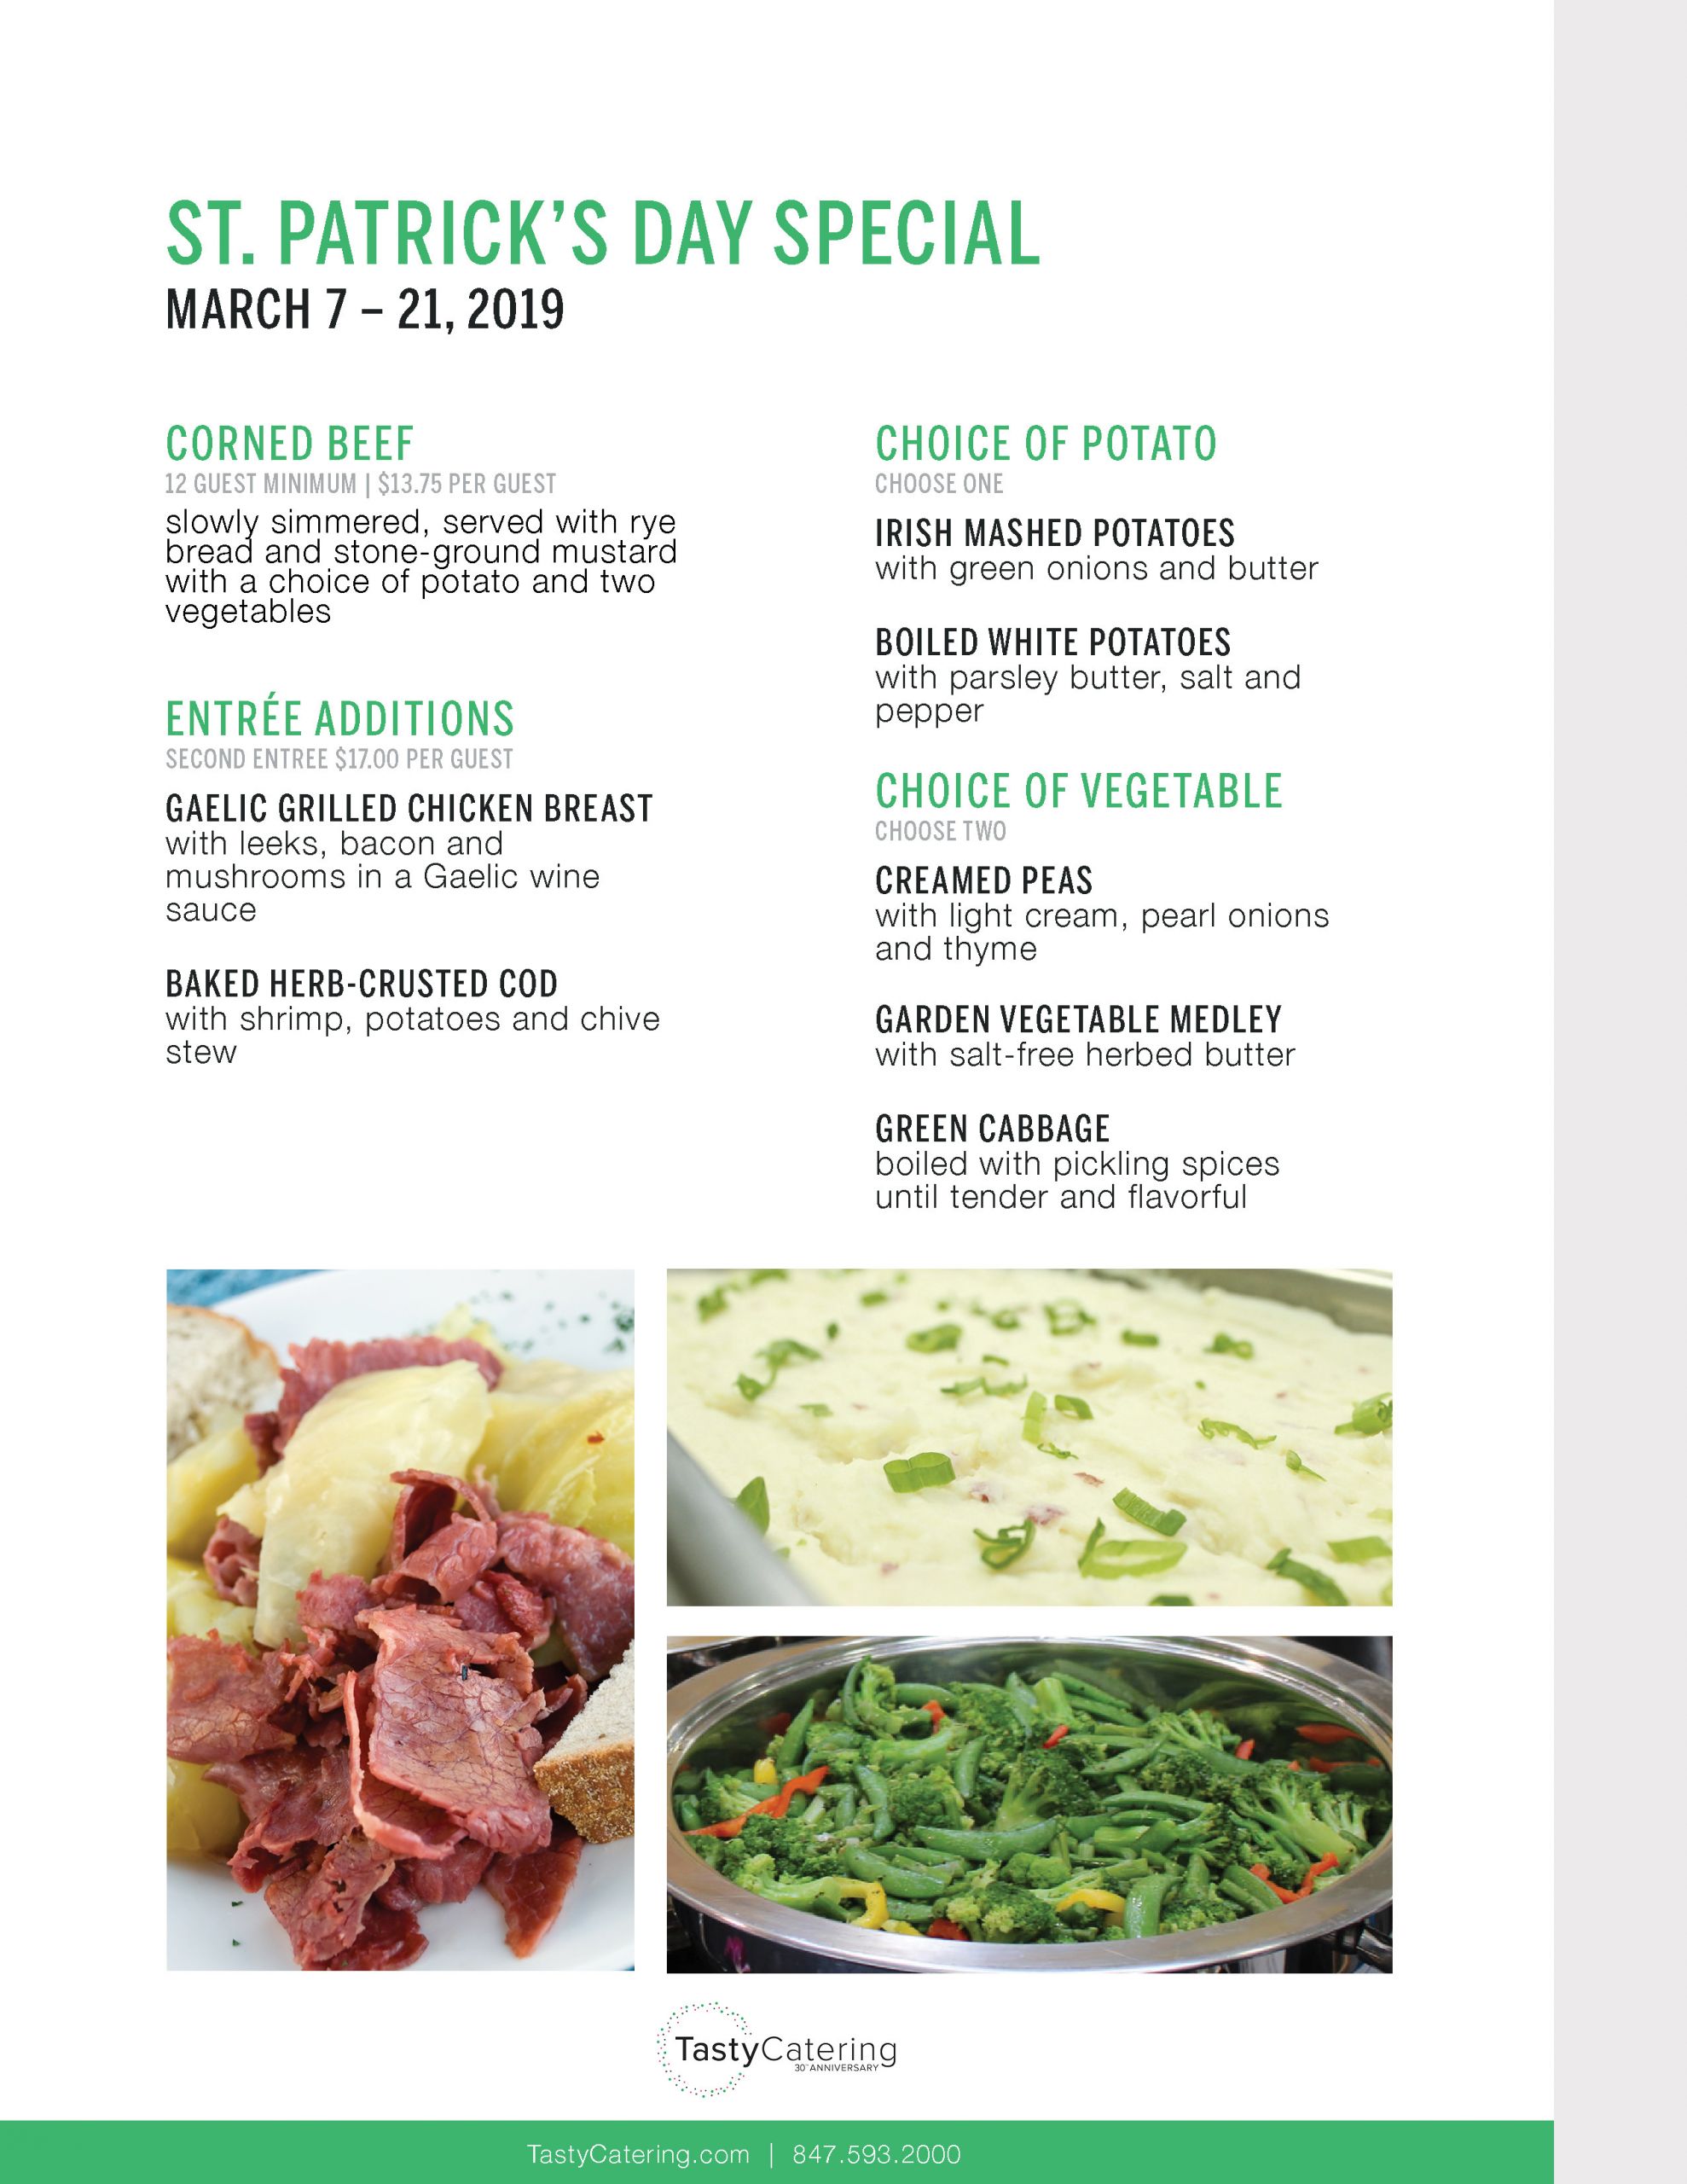 St Patrick's Day Food Specials
 Special Menu for St Patrick’s Day